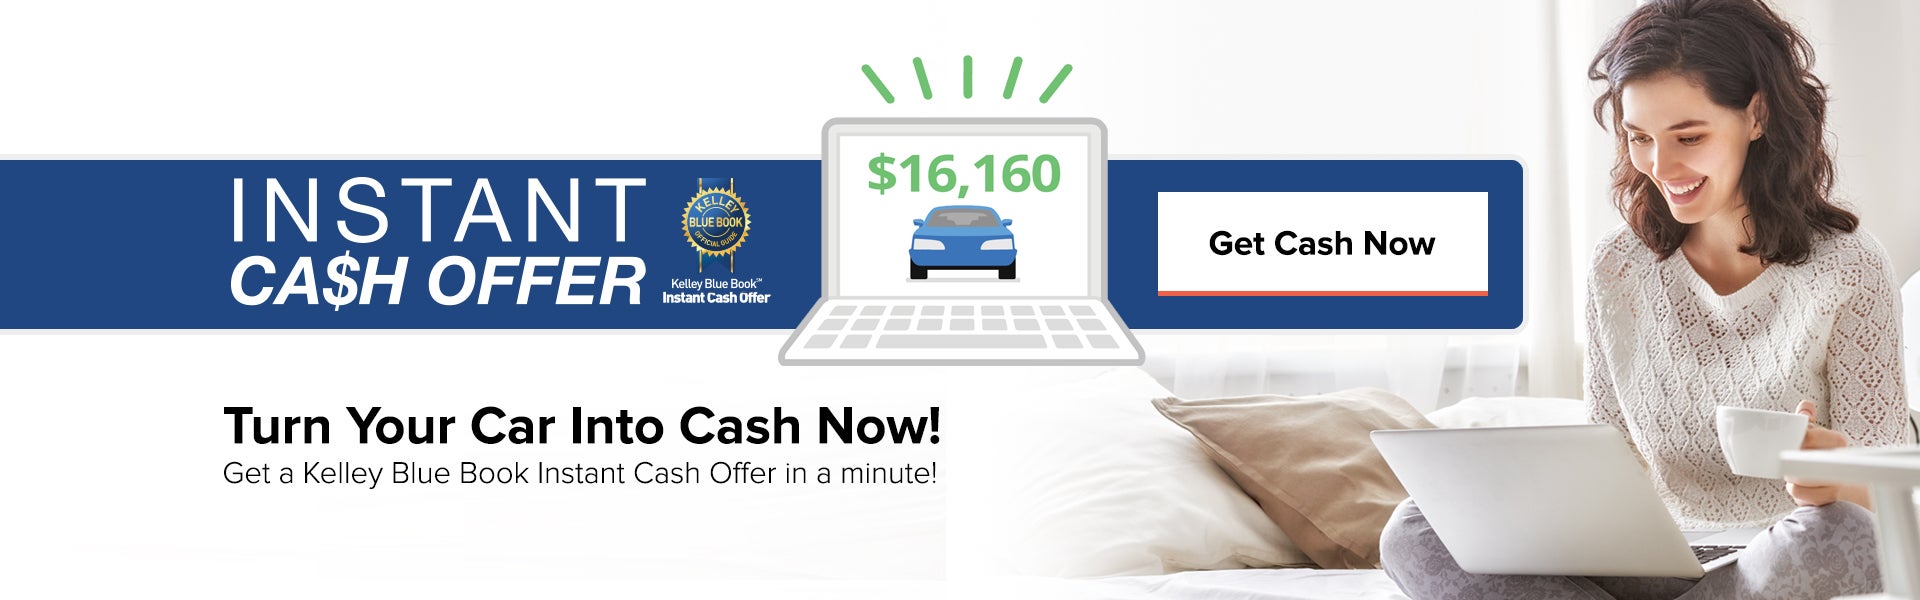 Sell or Trade Your Car - Instant Cash Offer